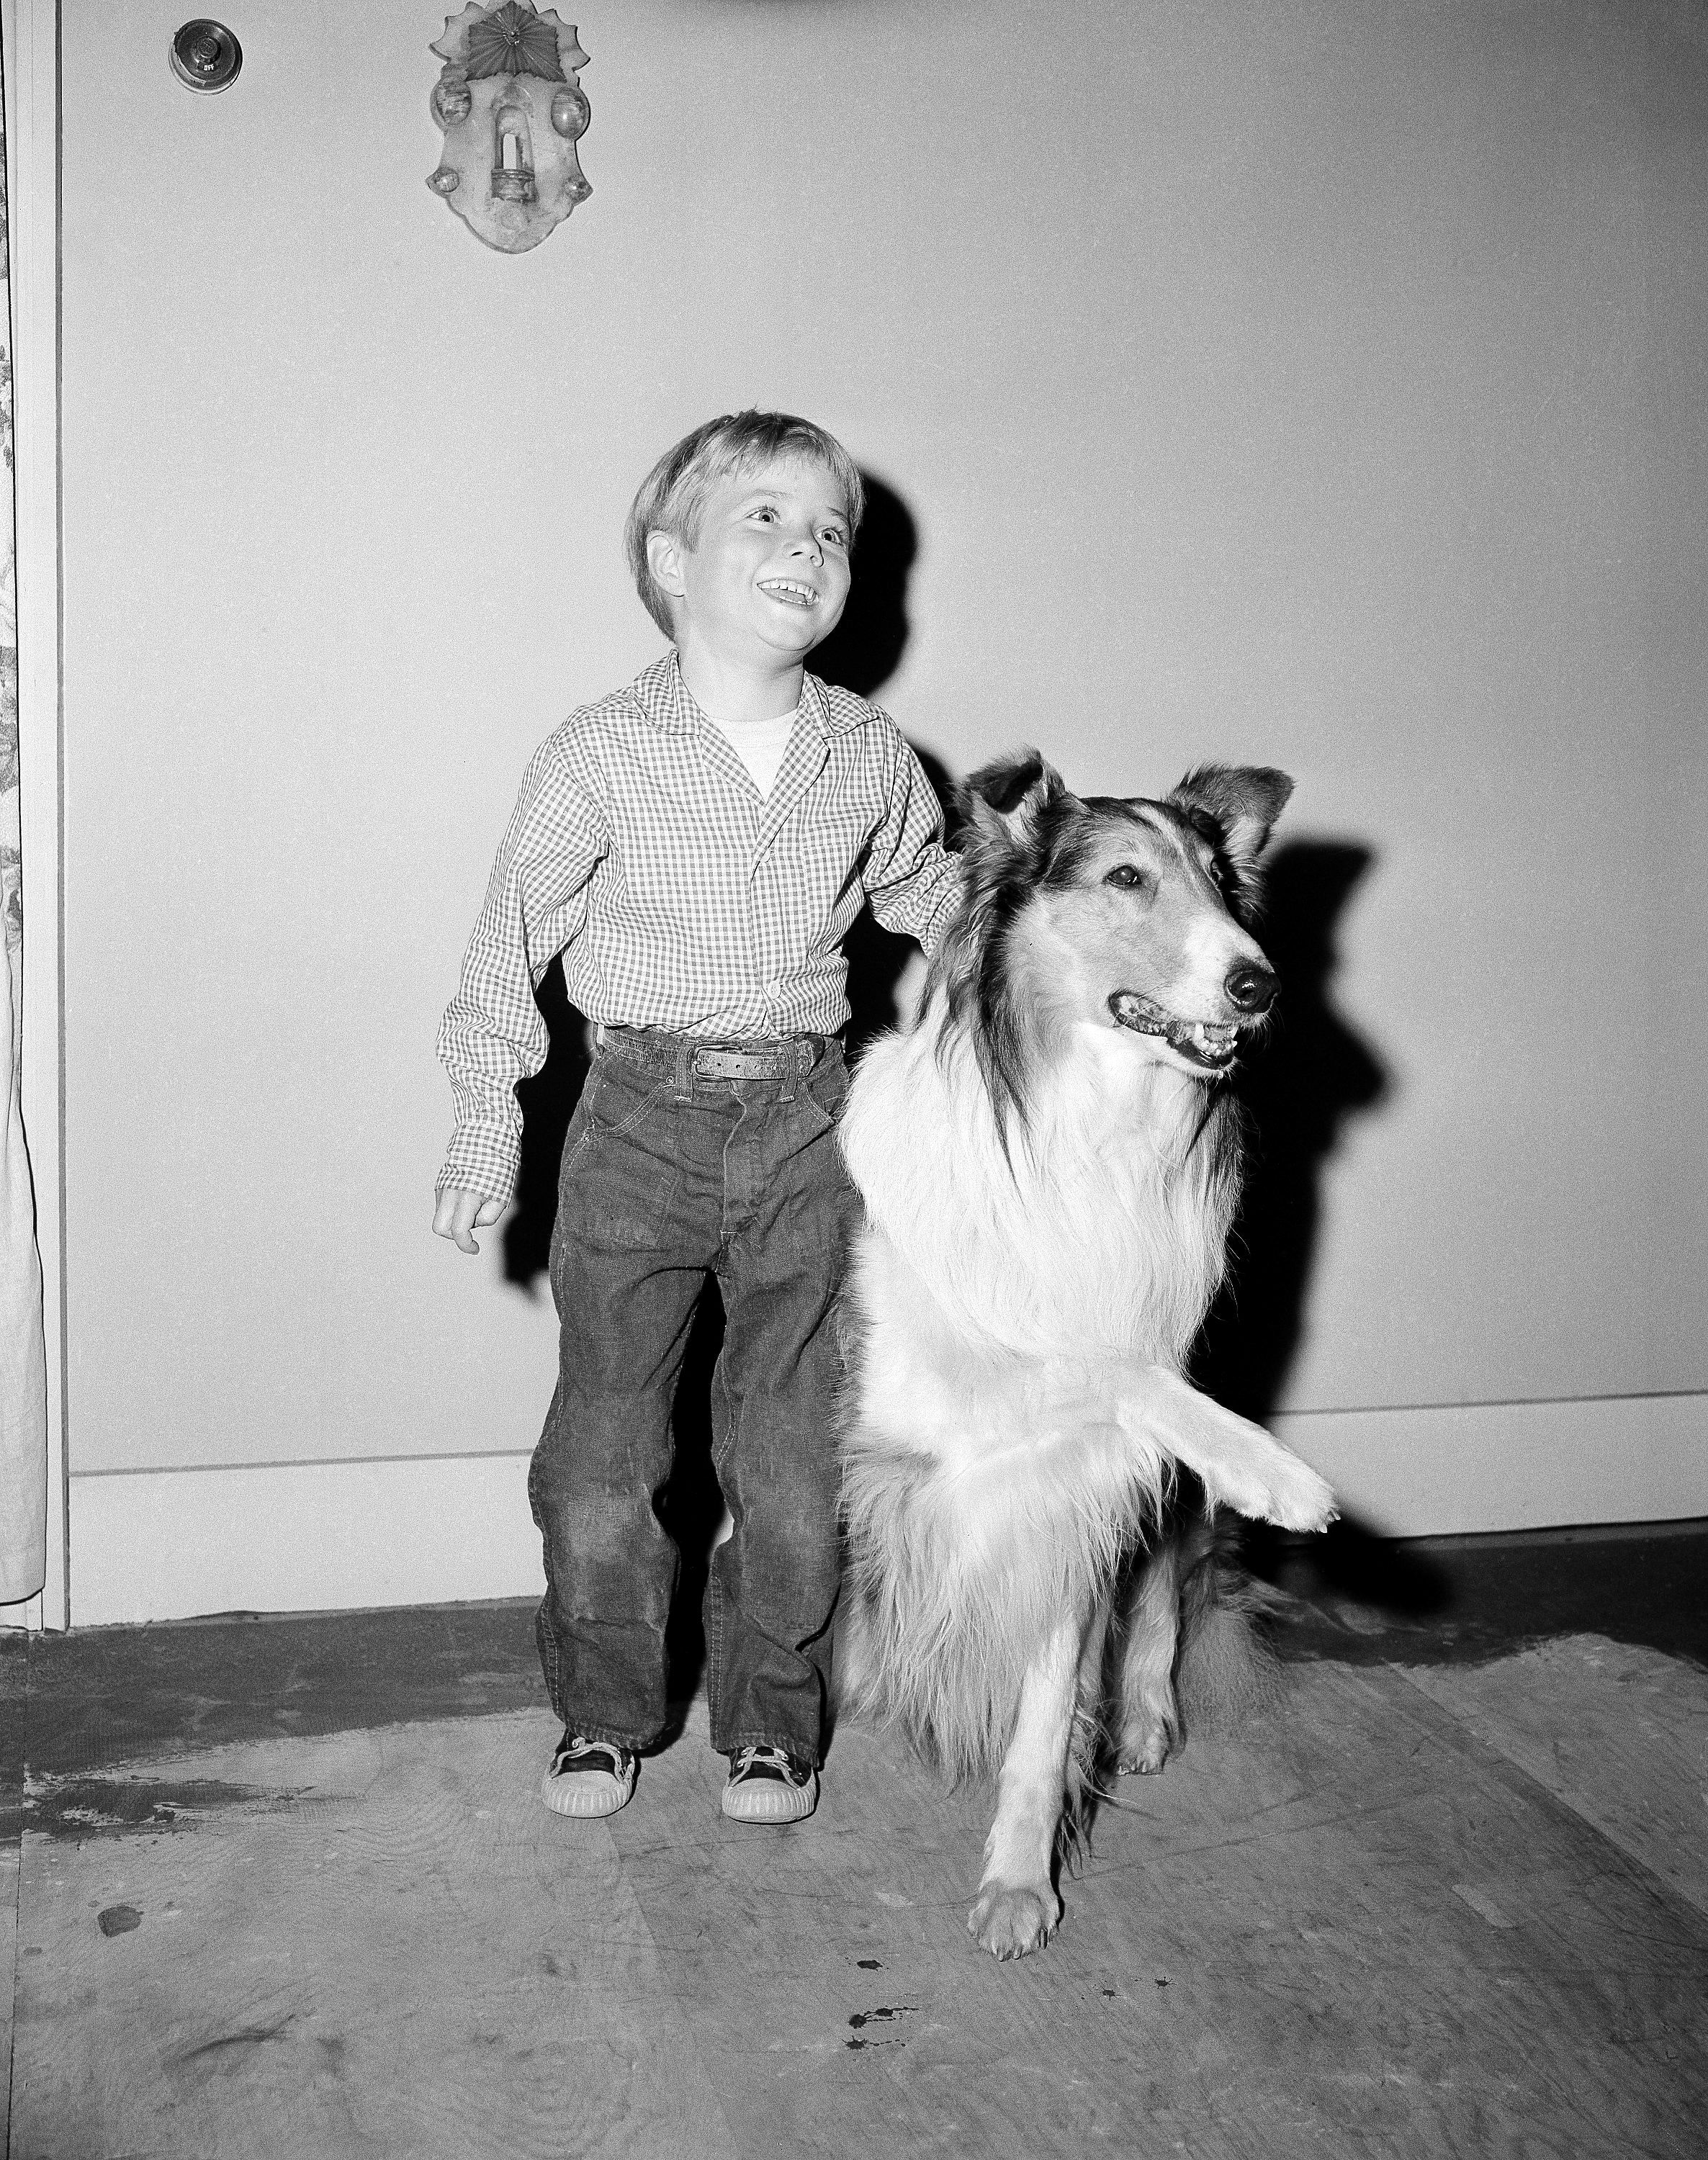 Back to the well: Jon 'Timmy' Provost talks life with Lassie